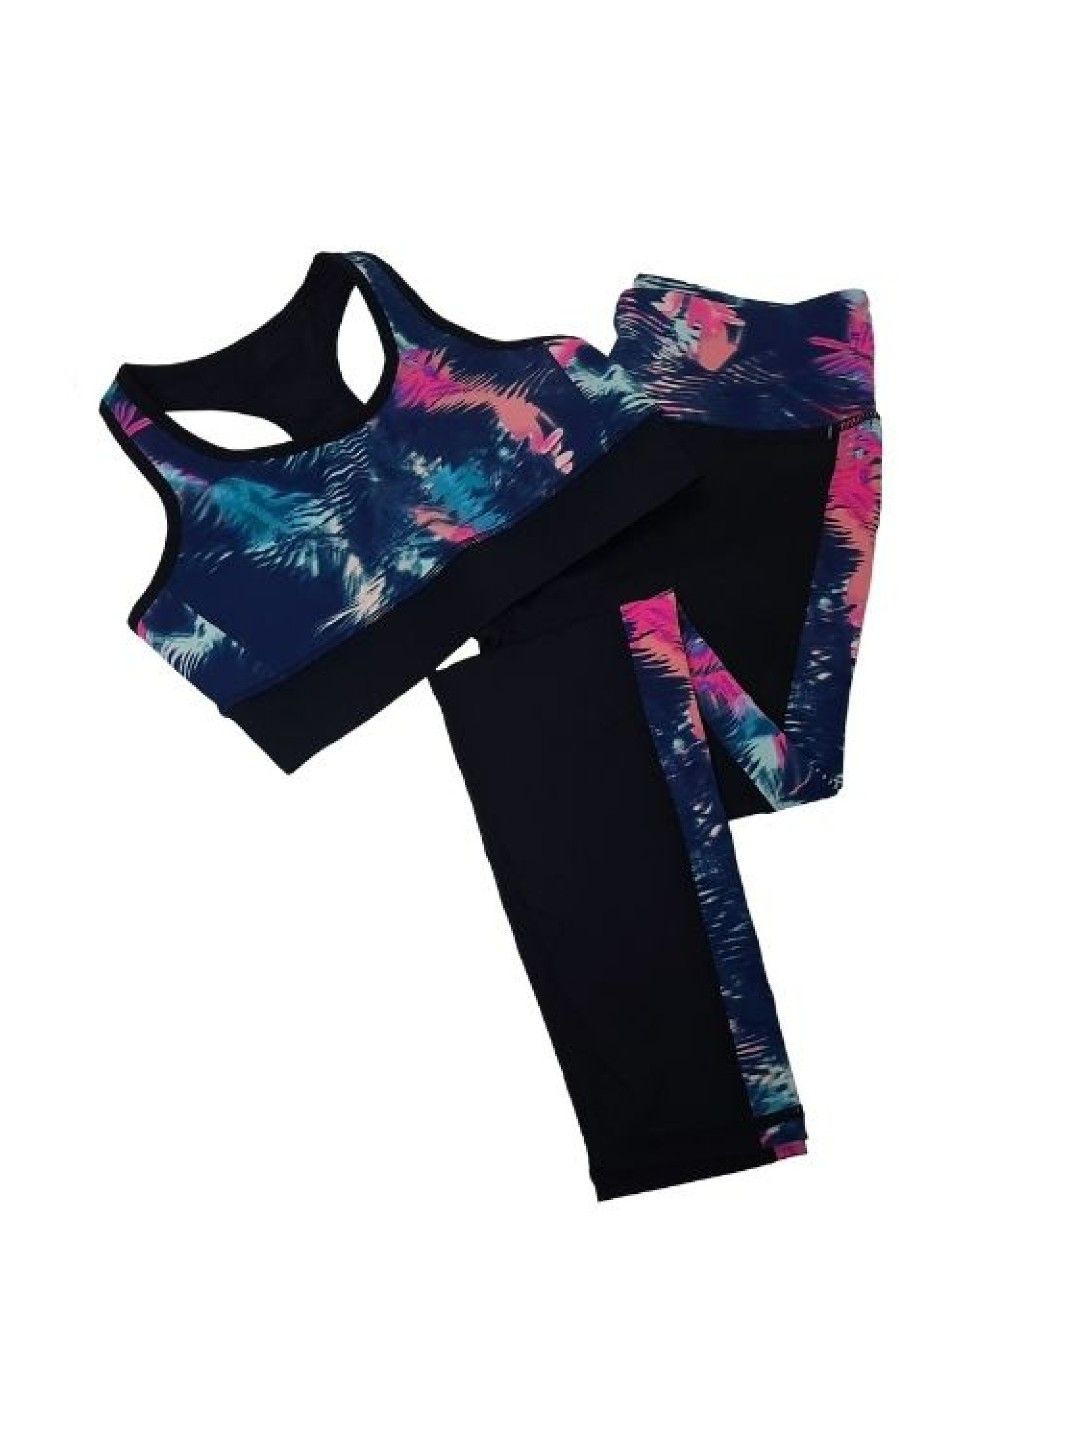 Womanly Dry Fit Athleisure Wear (Cotton Candy)